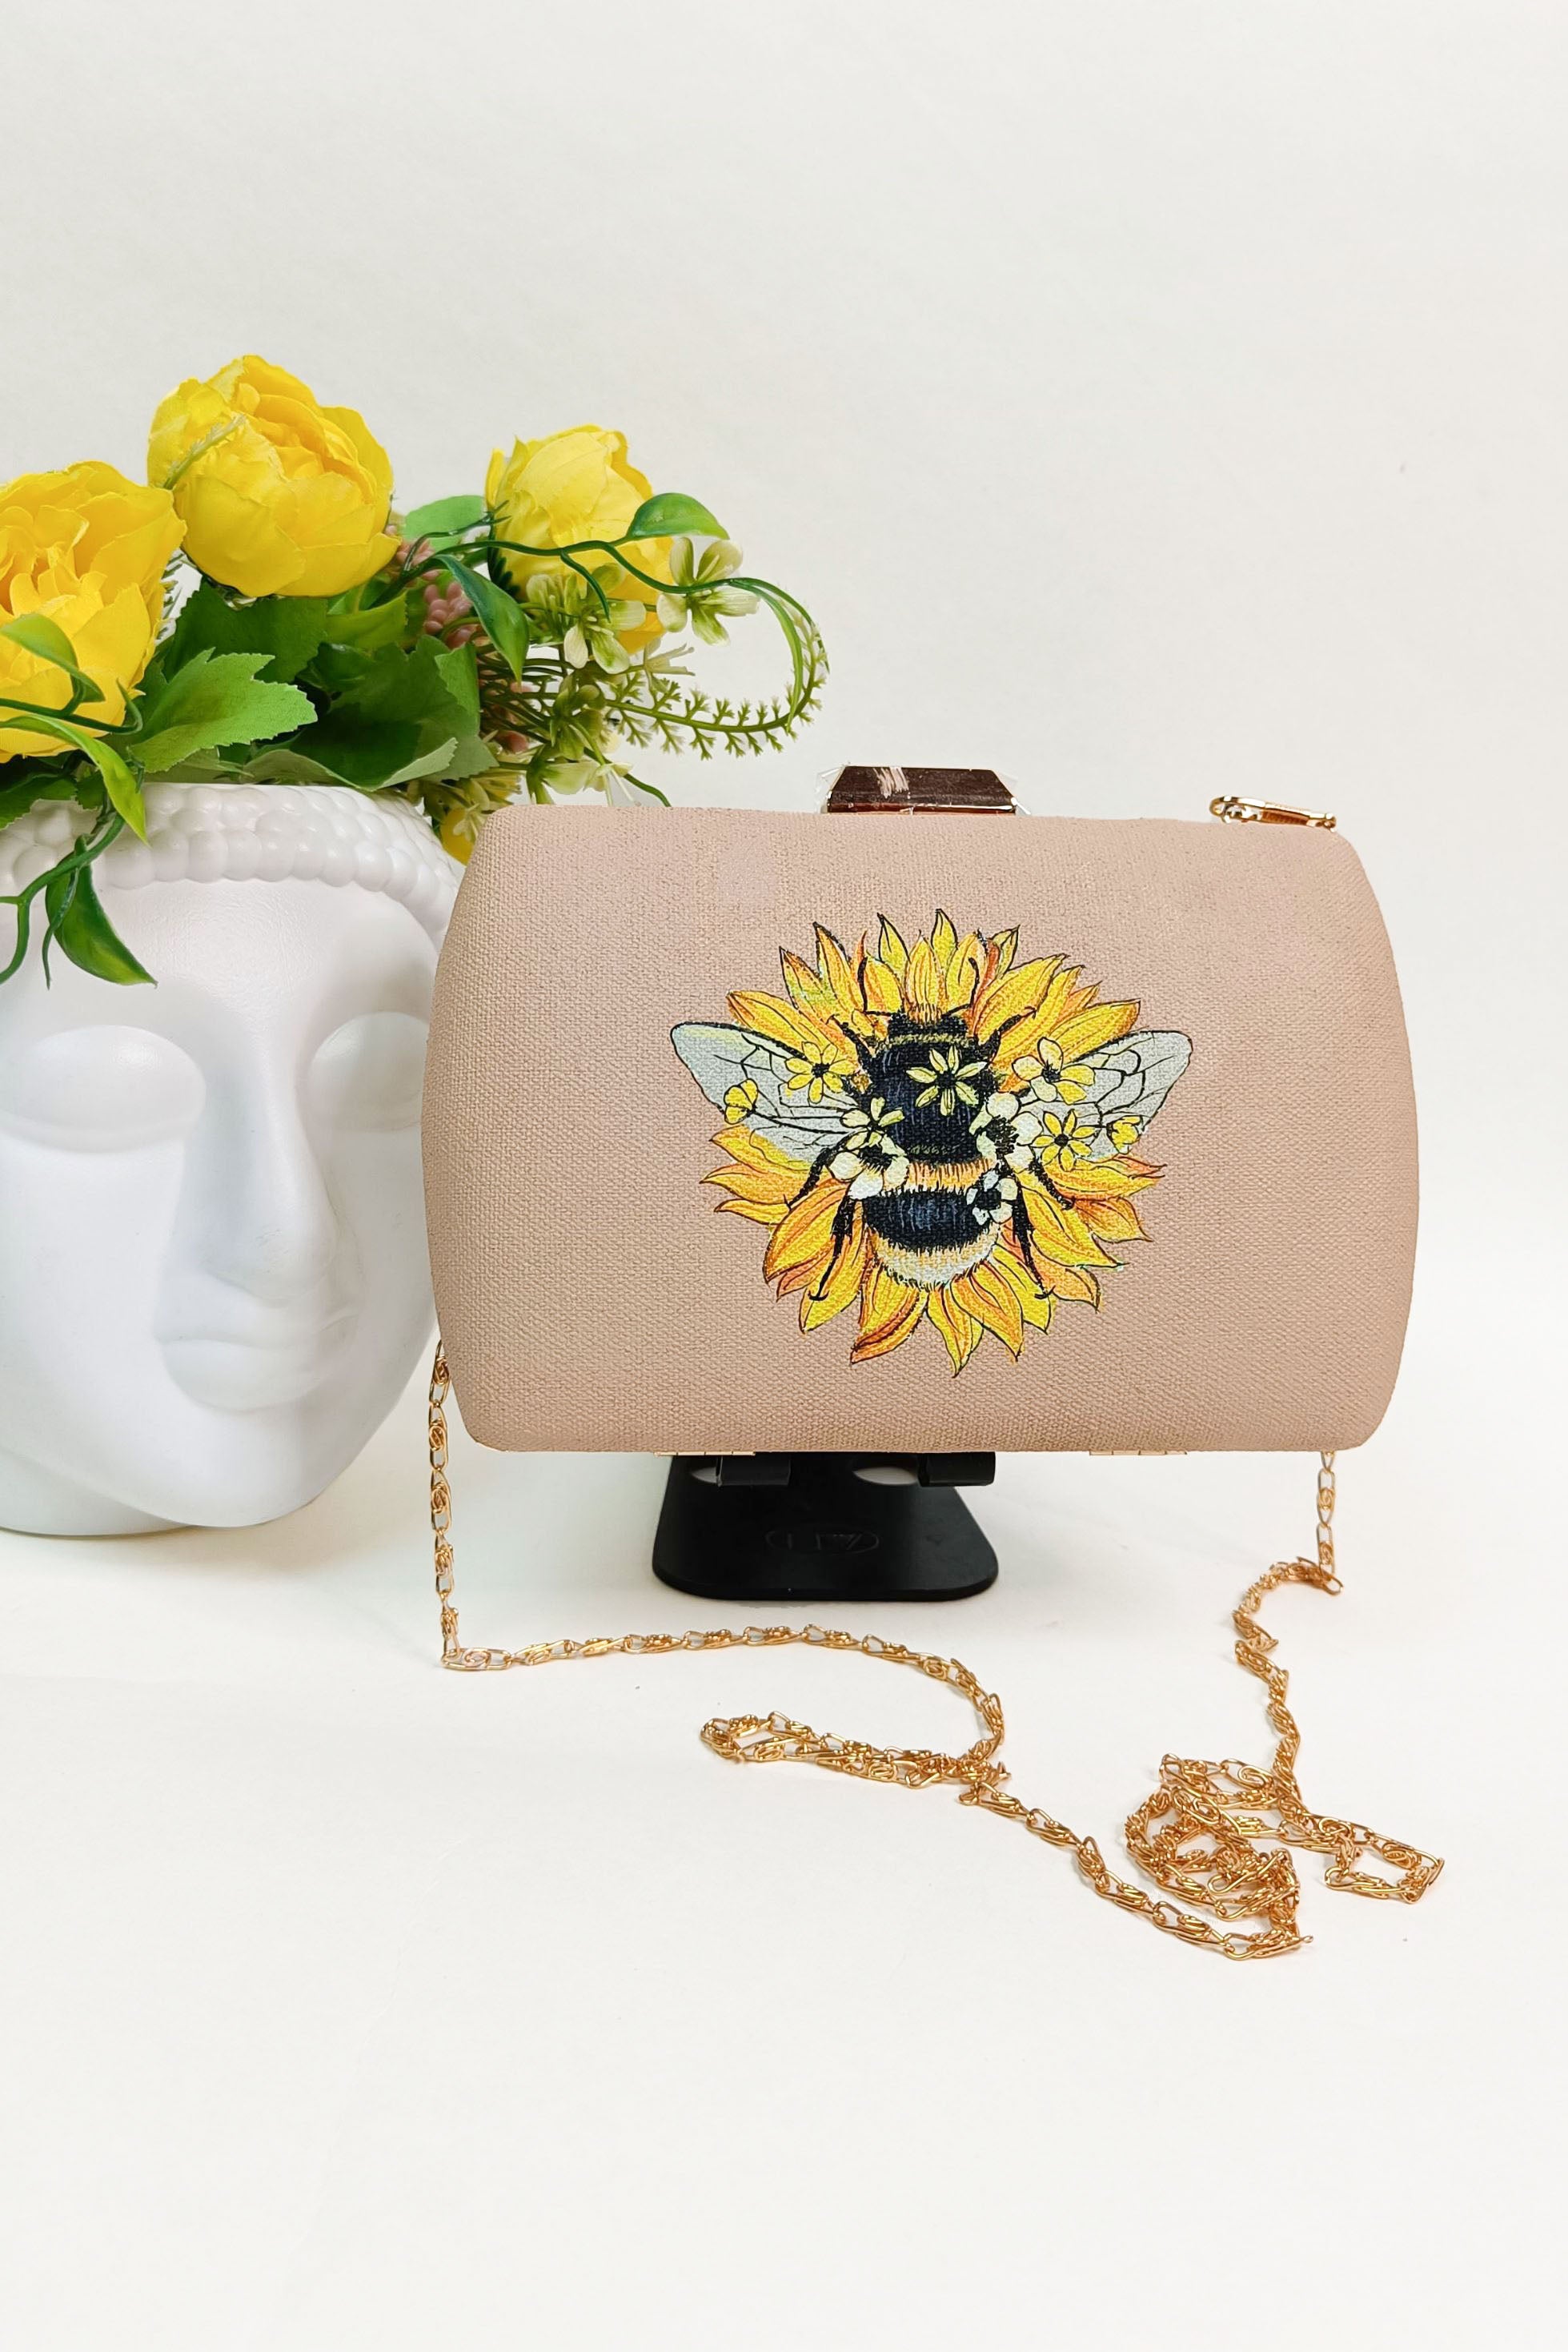 Designer inspired hand painted Bags – CINDY in LA